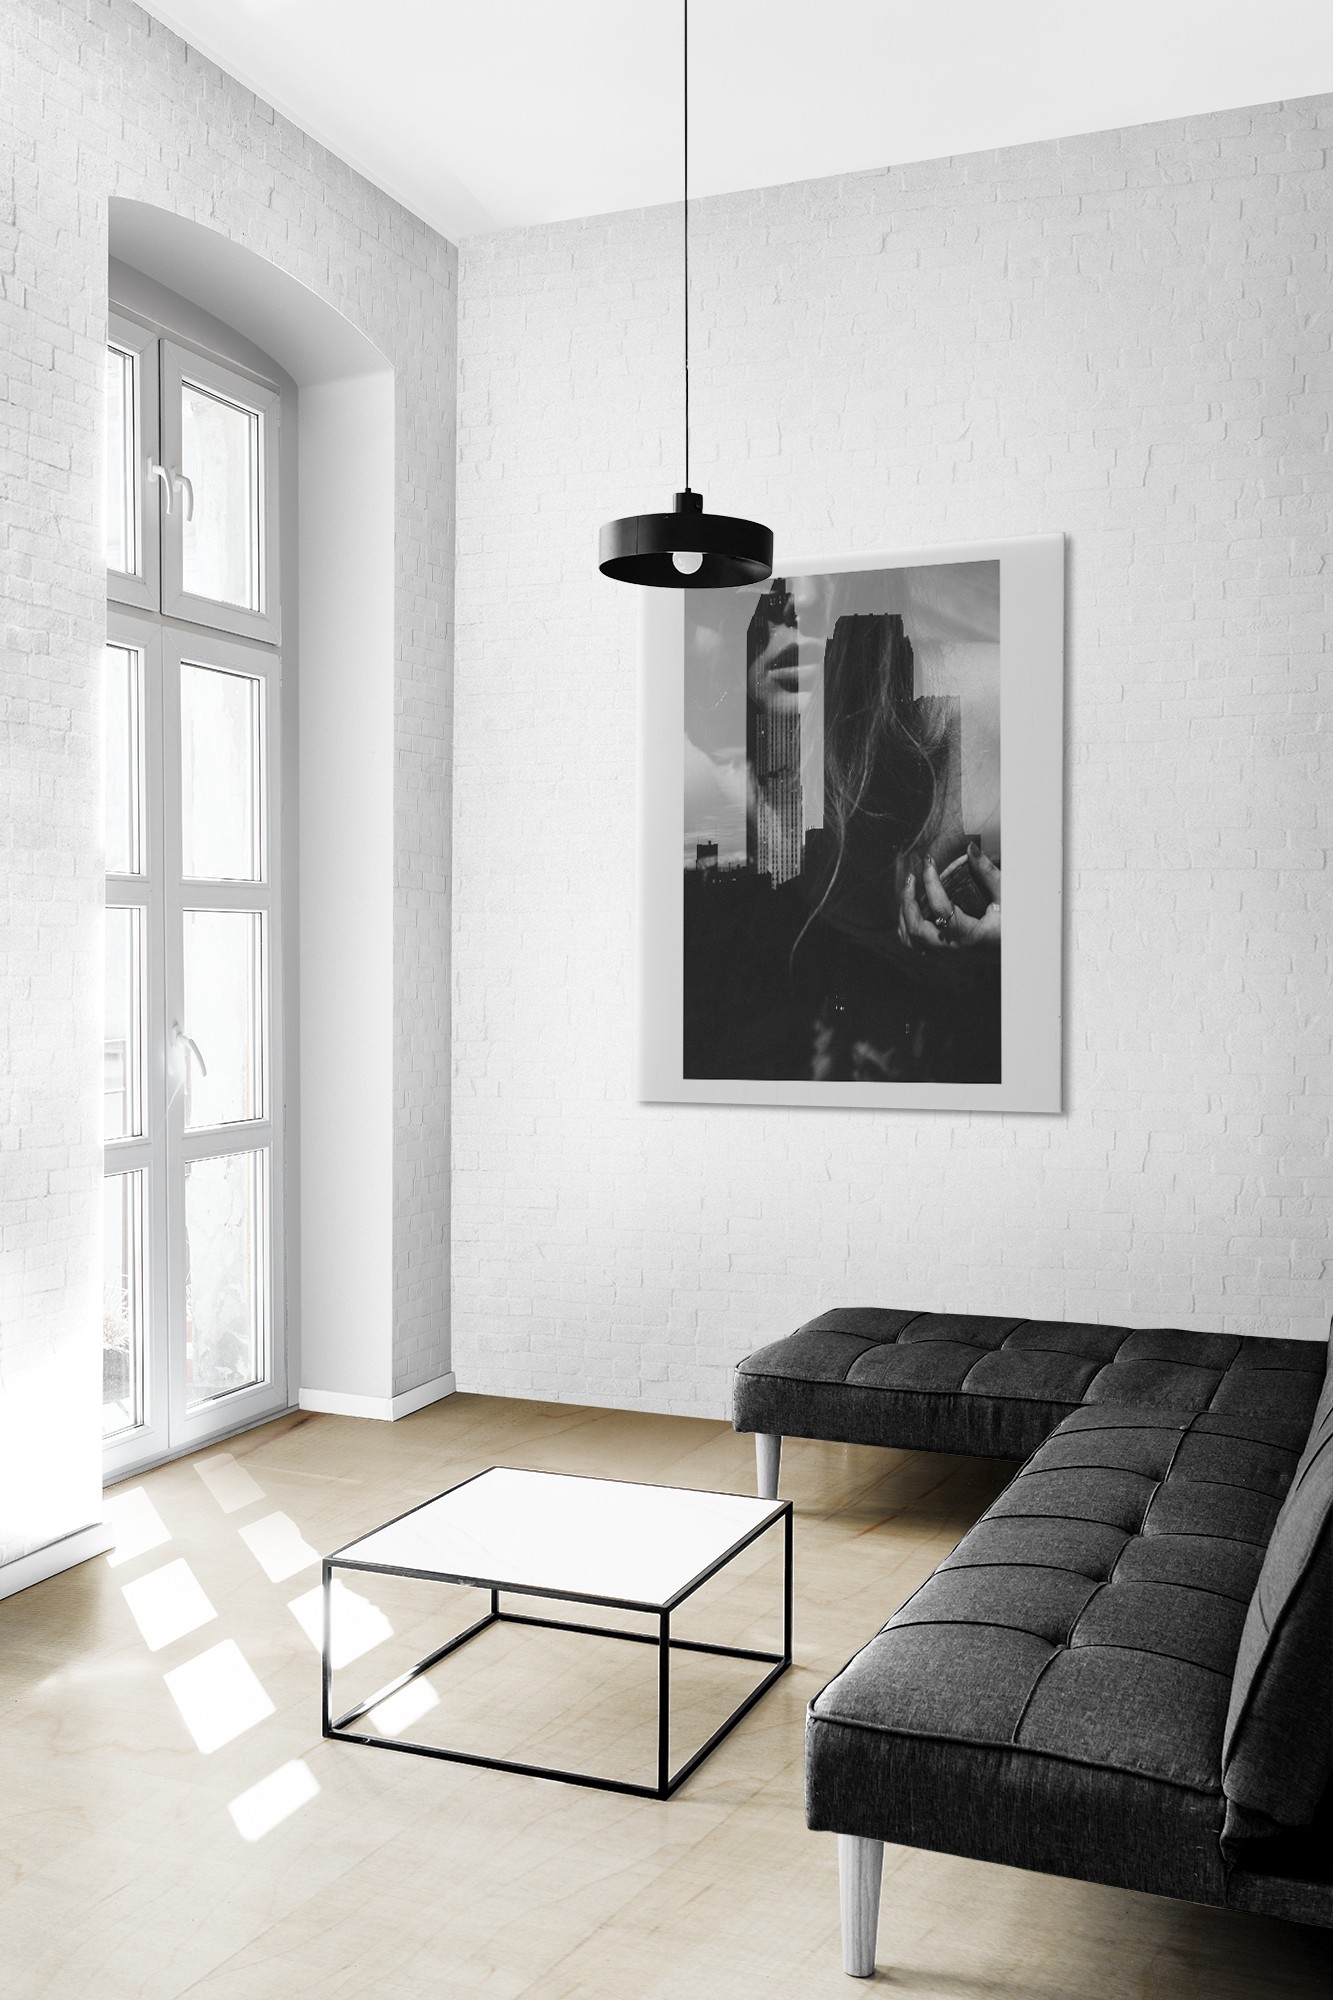 Living room mockup psd editable floor sofa wall and picture frame